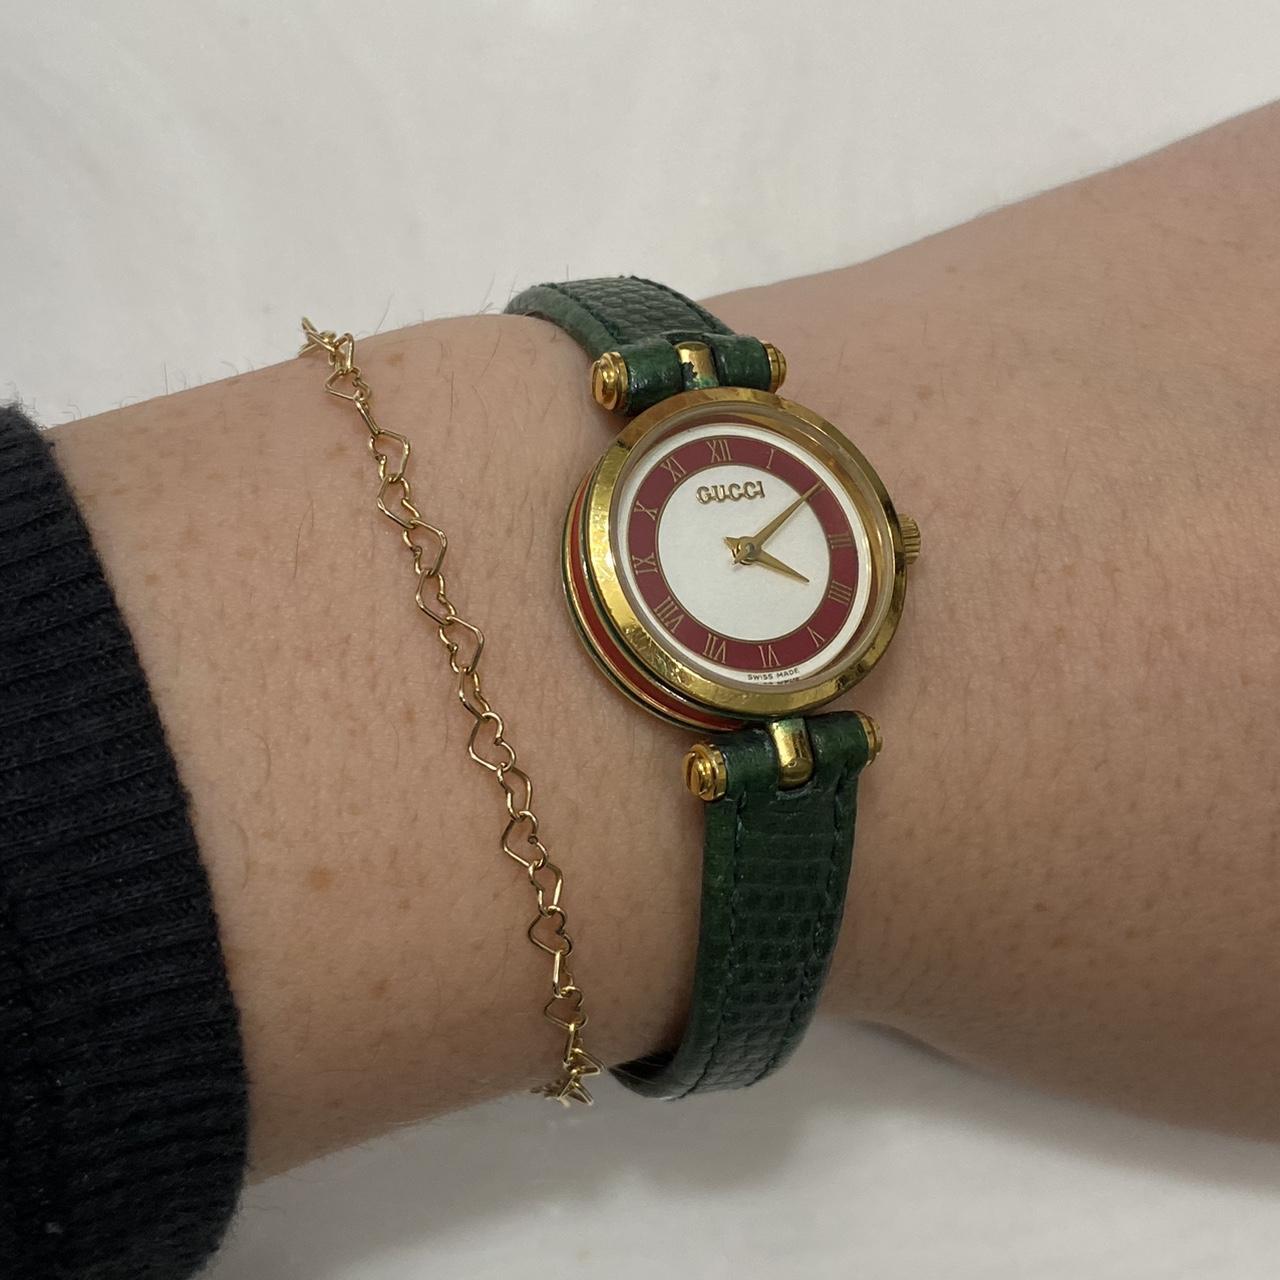 Gucci Women's Green and Red Watch